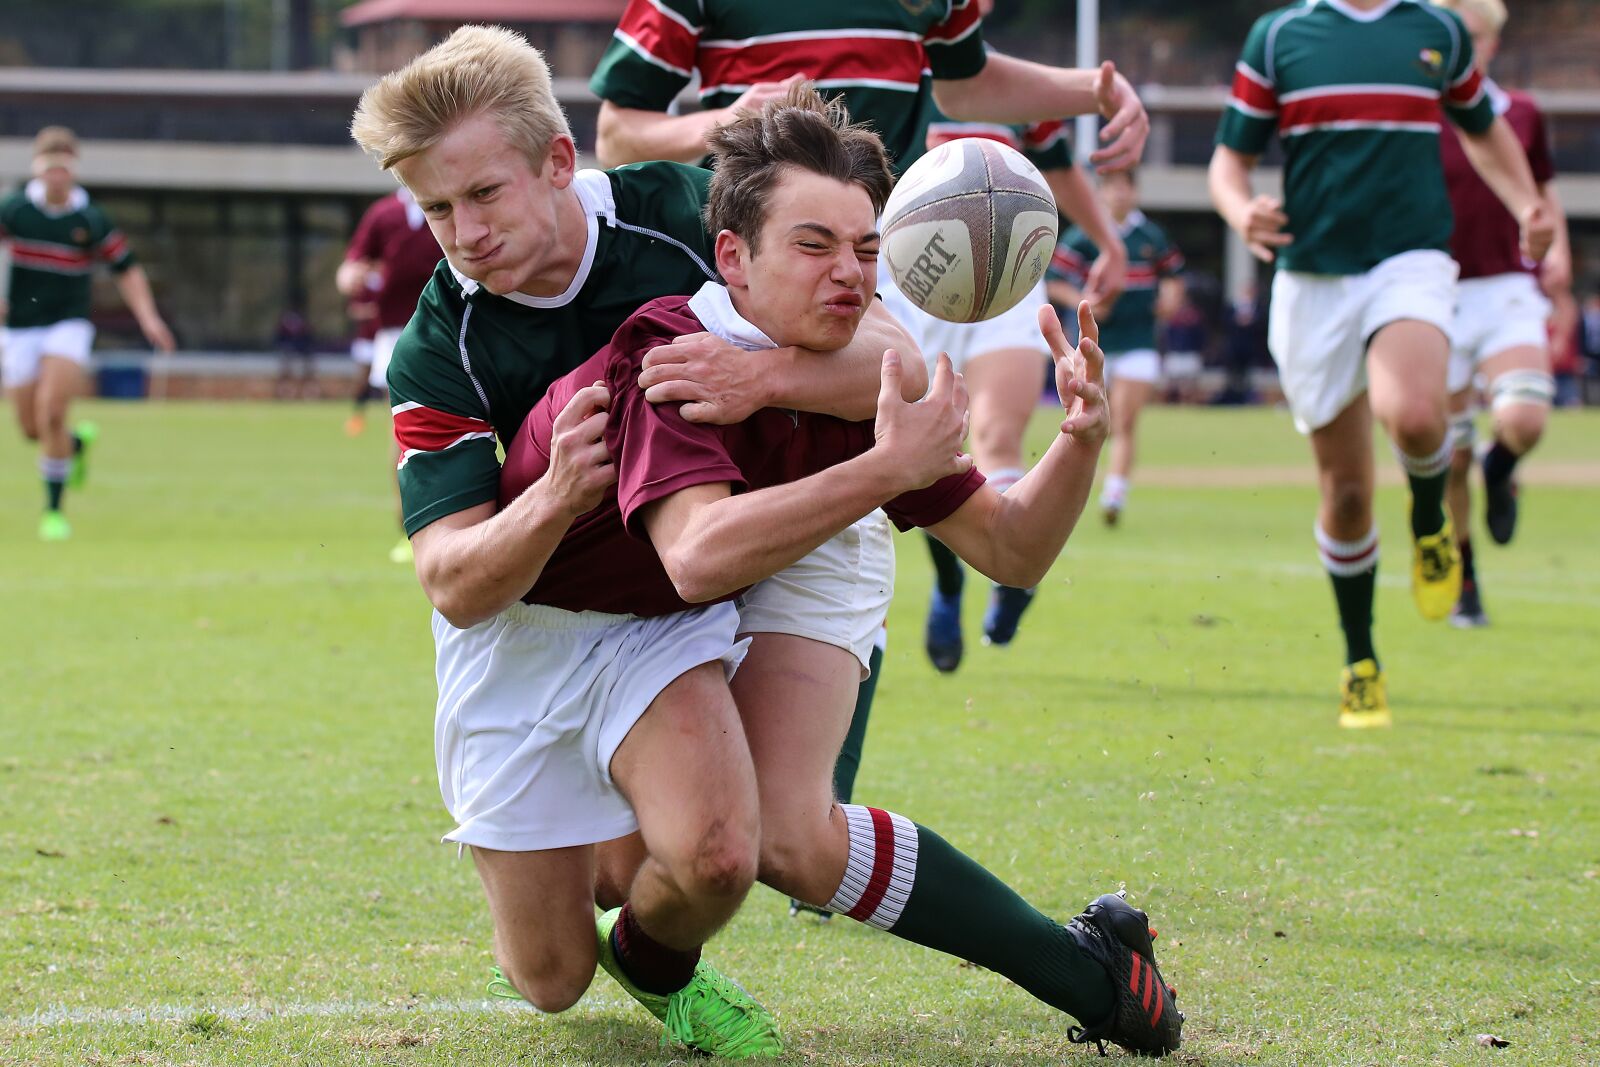 150-600mm F5-6.3 DG OS HSM | Sports 014 sample photo. Rugby, tackle, sport photography